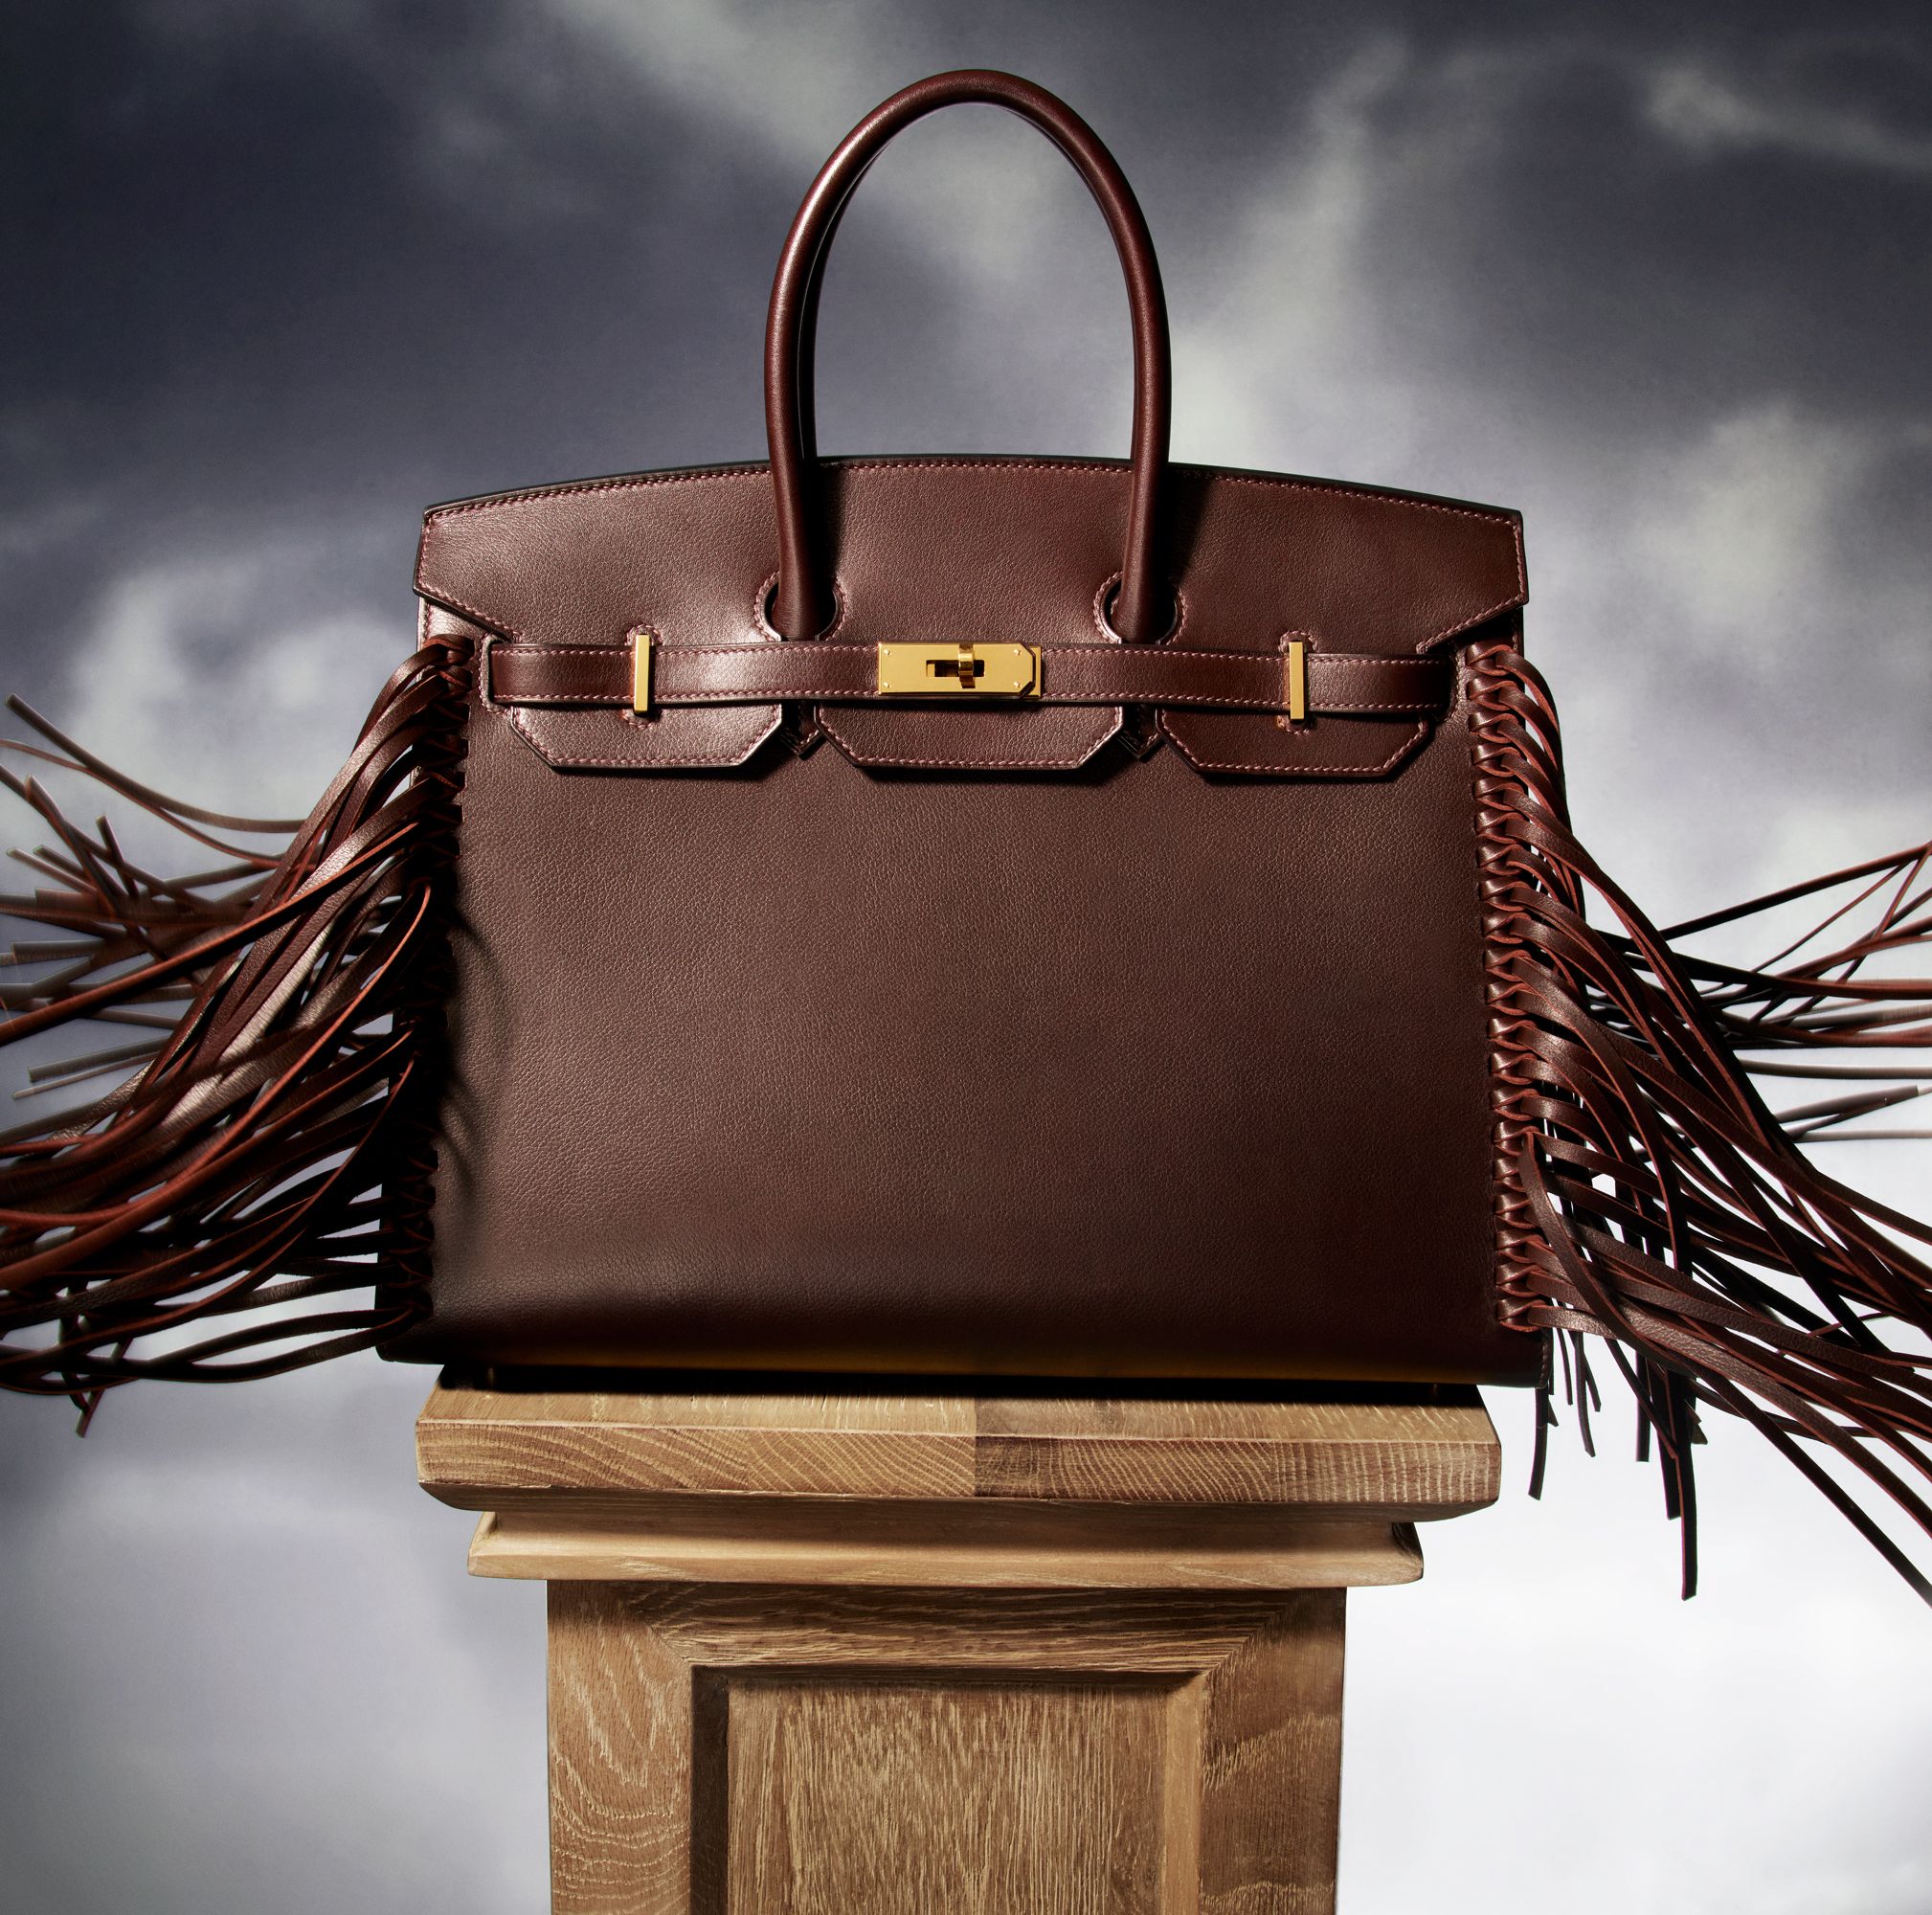 Hermes lawsuit claims luxury retailer reserves Birkin bags for its biggest  spenders - ABC News